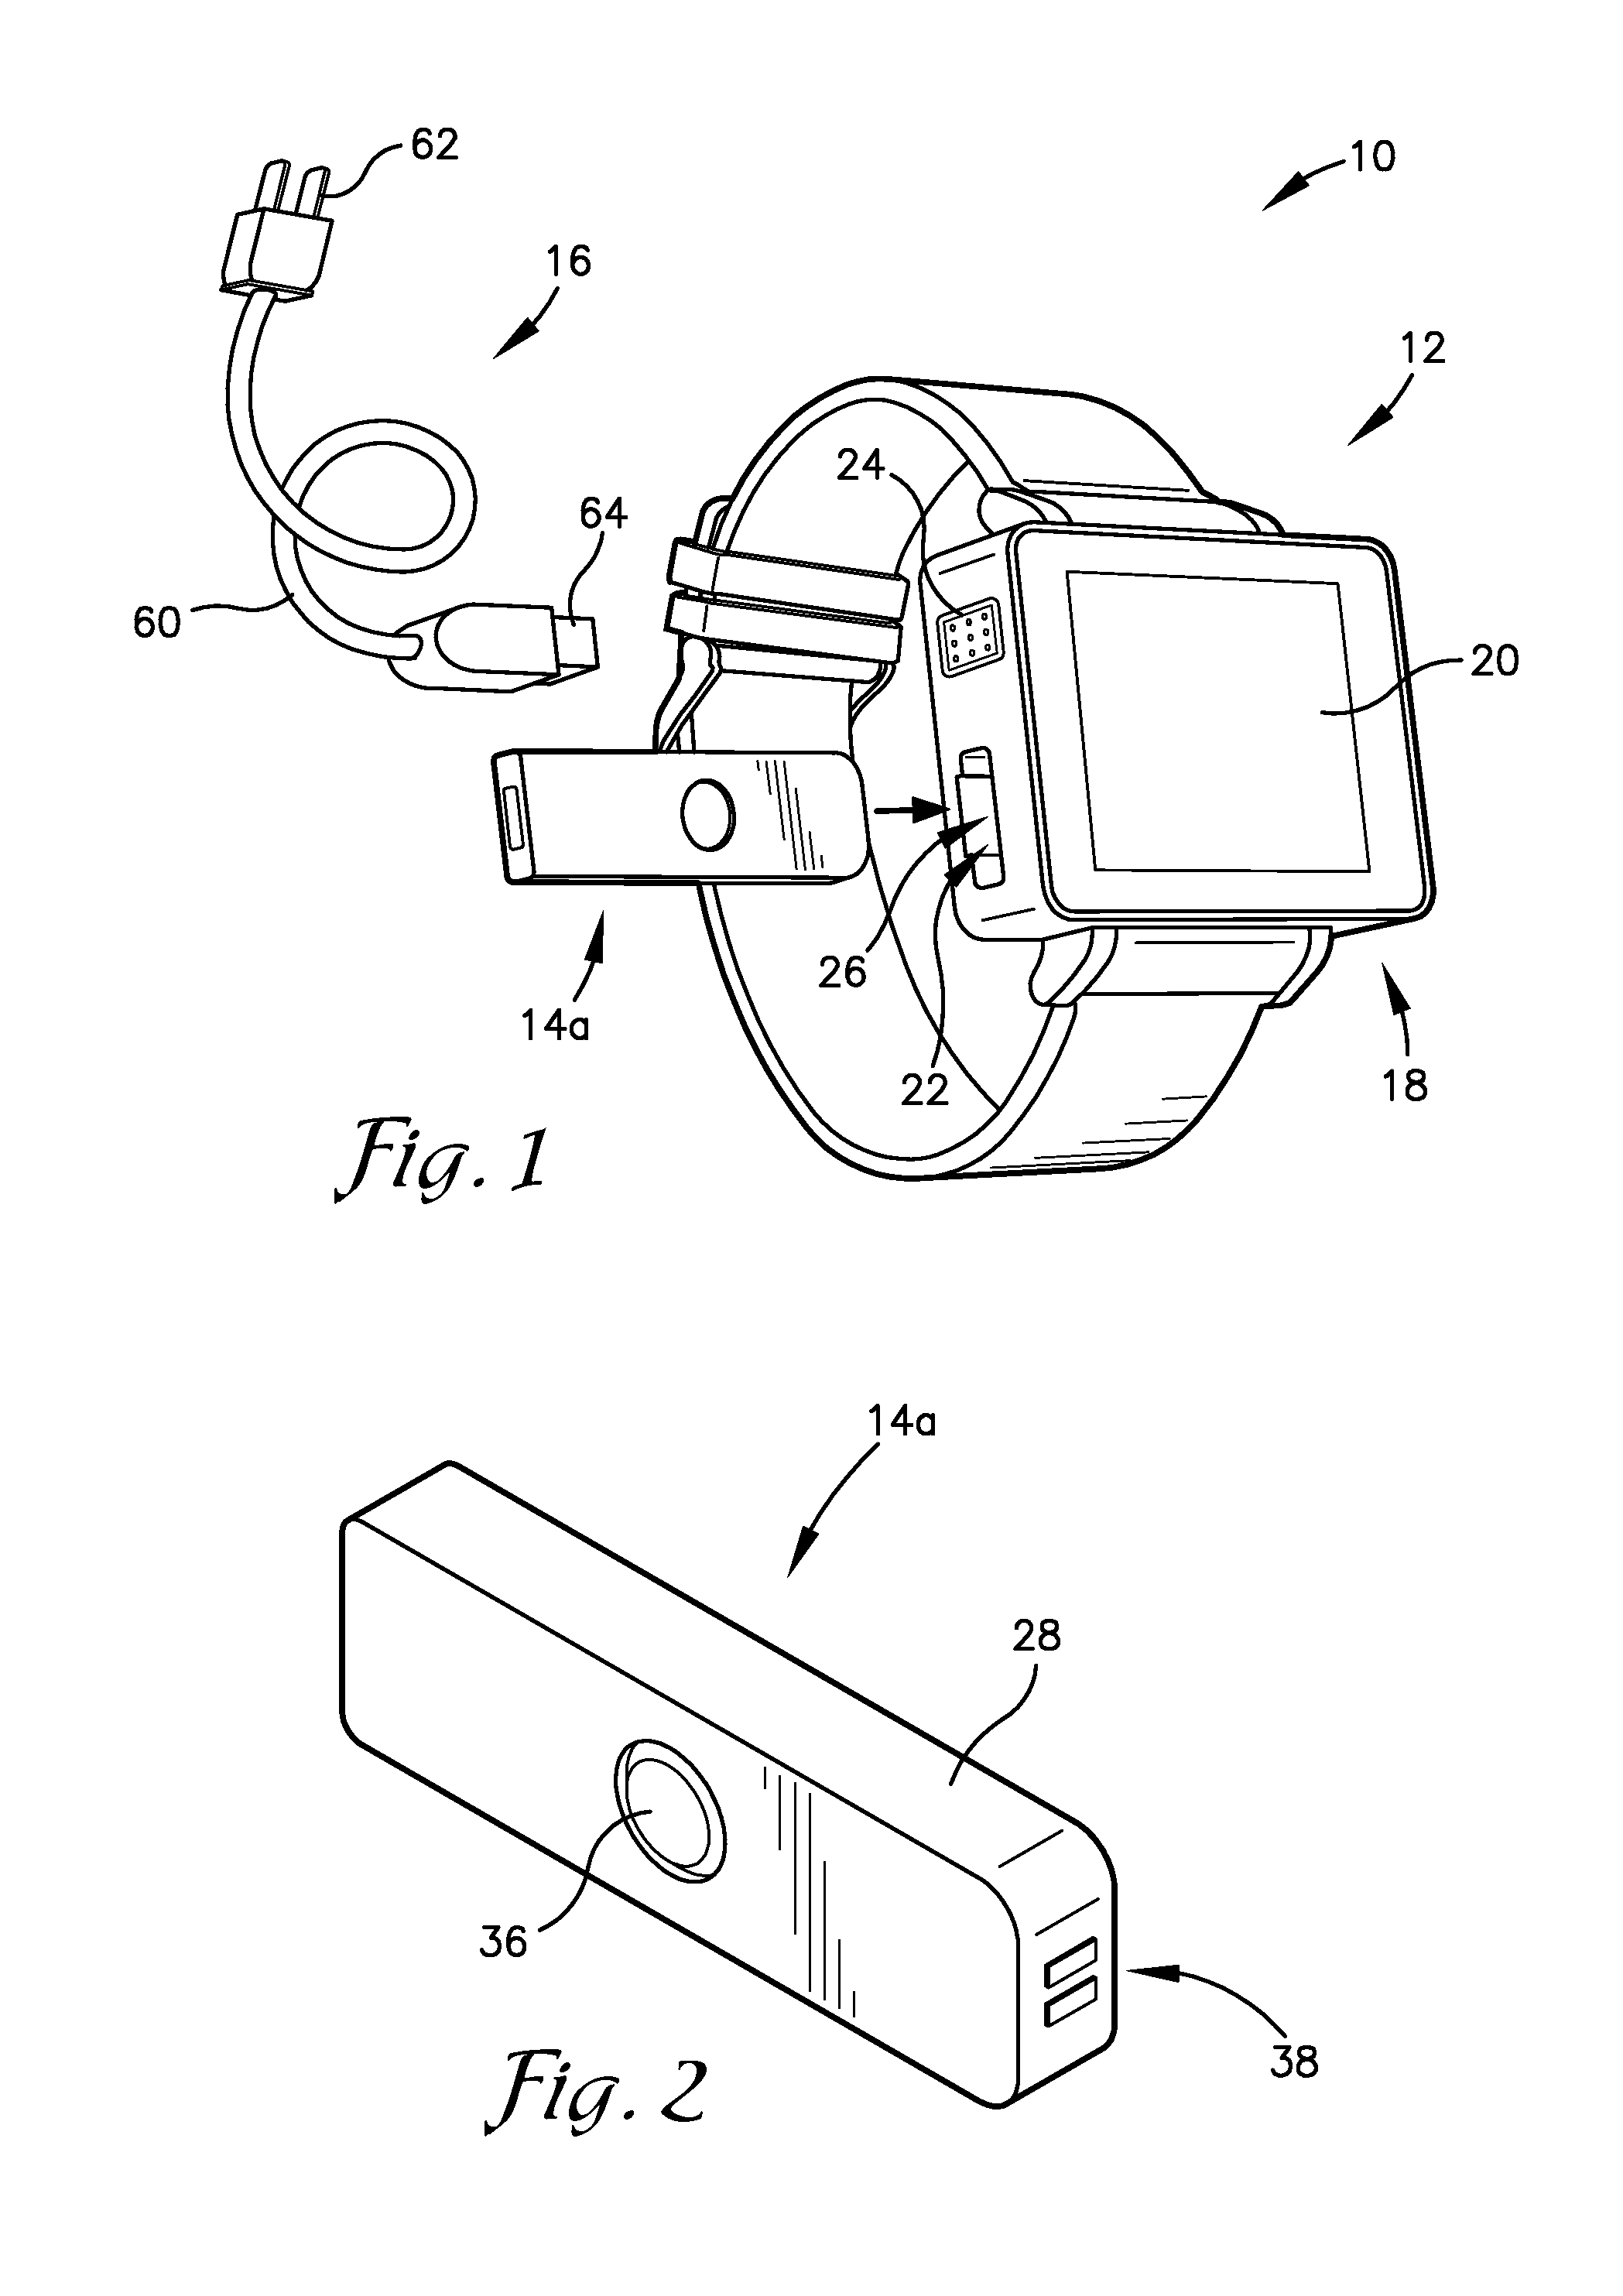 Integrated wireless headset system for electronic devices